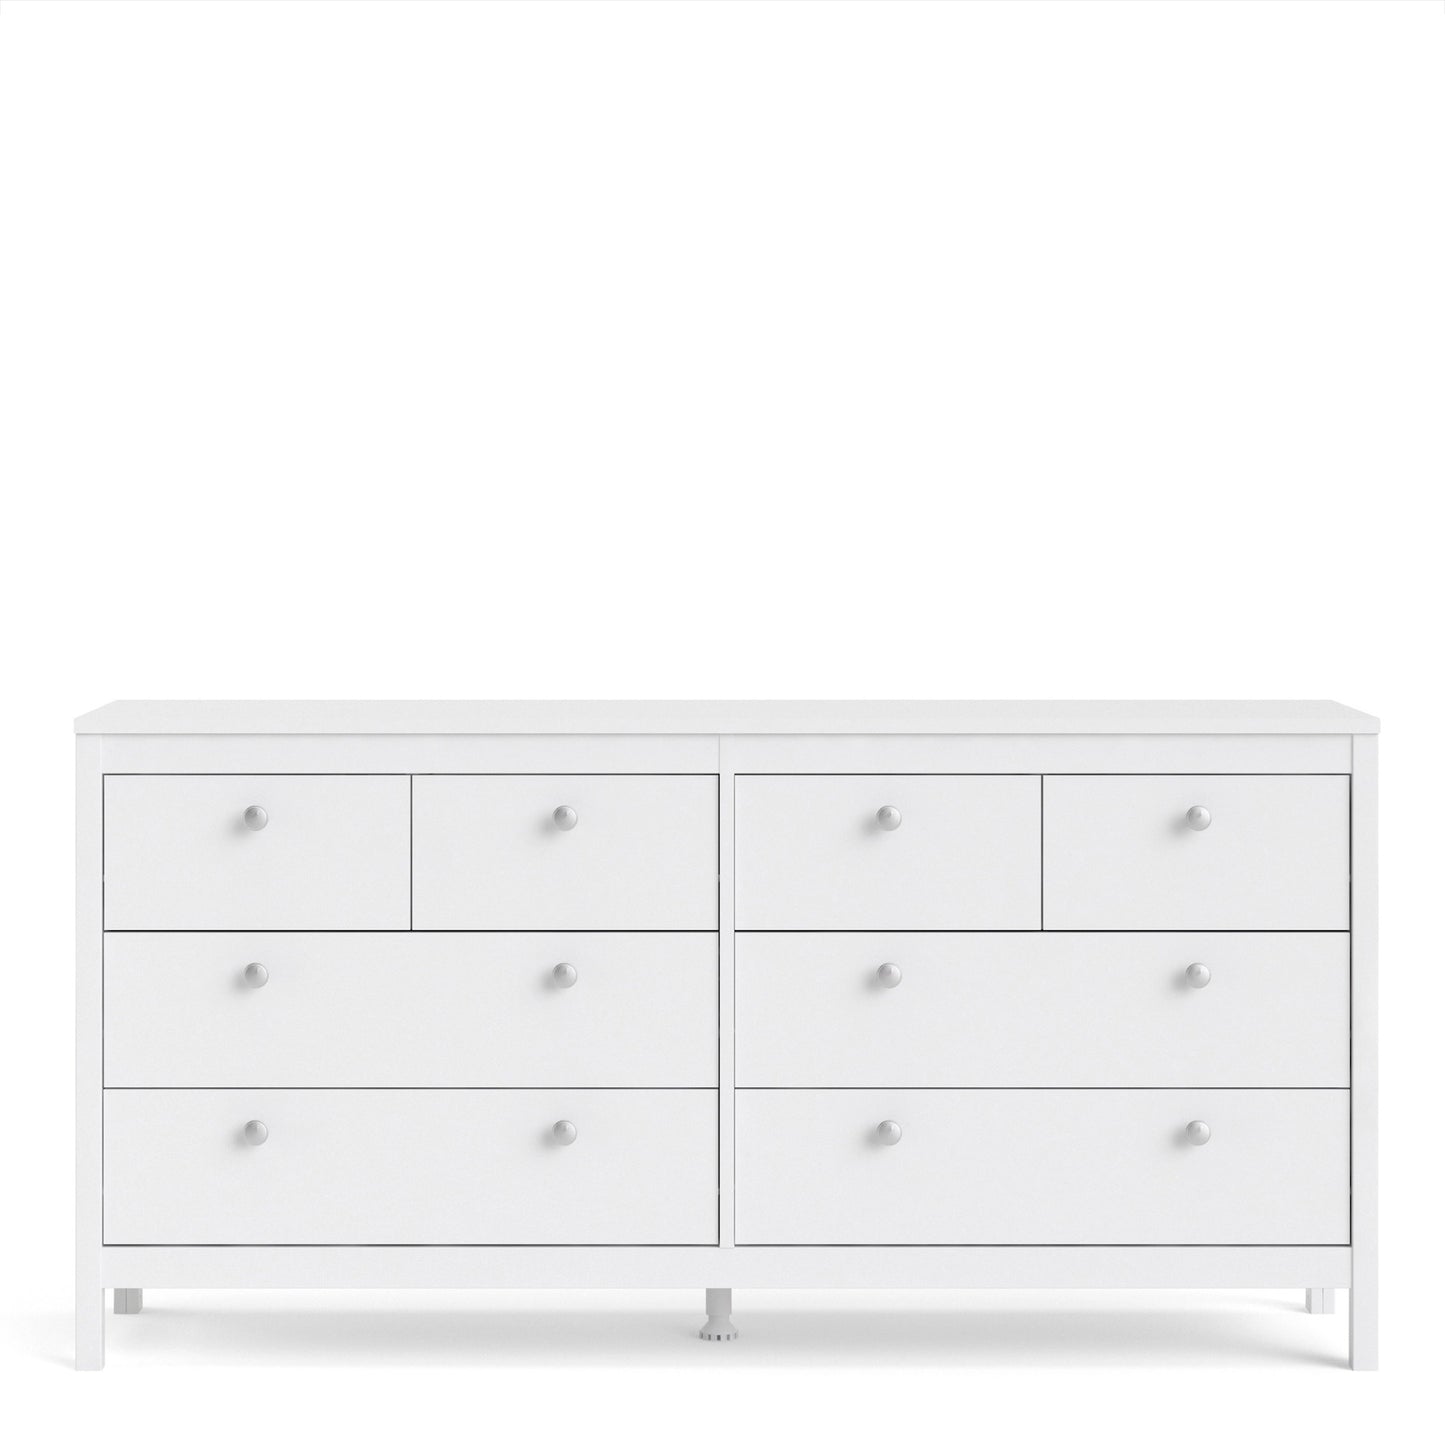 Furniture To Go Madrid Double Dresser 4+4 Drawers in White